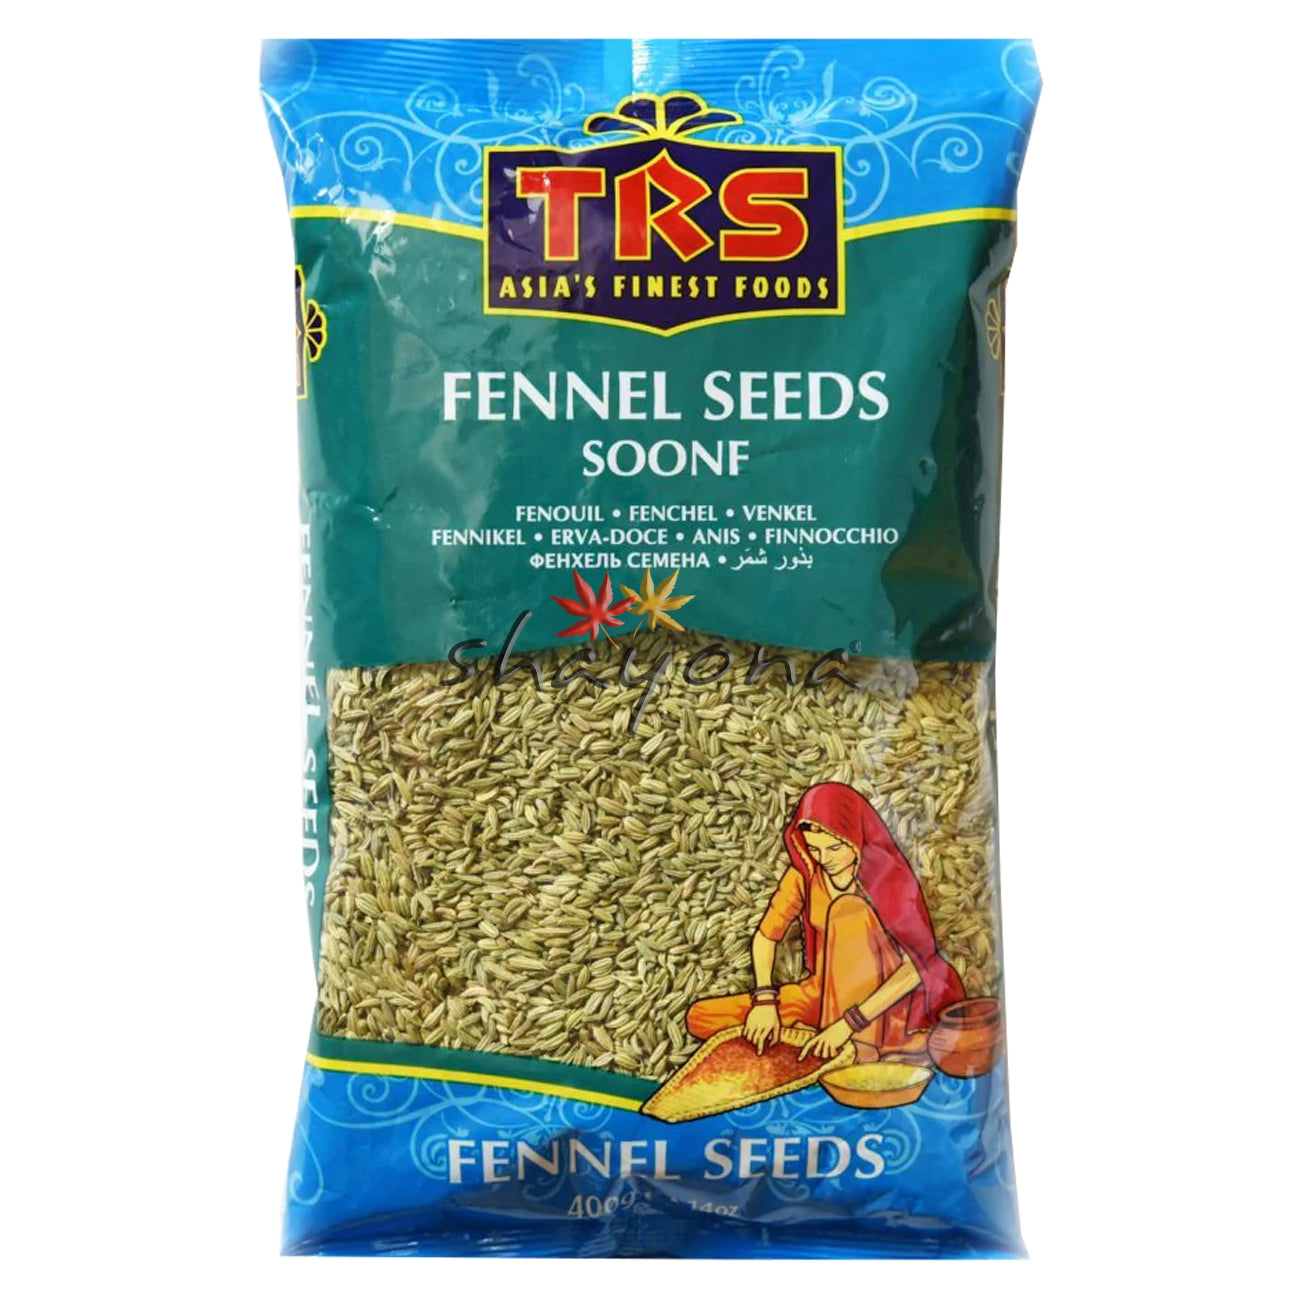 TRS Fennel Seeds